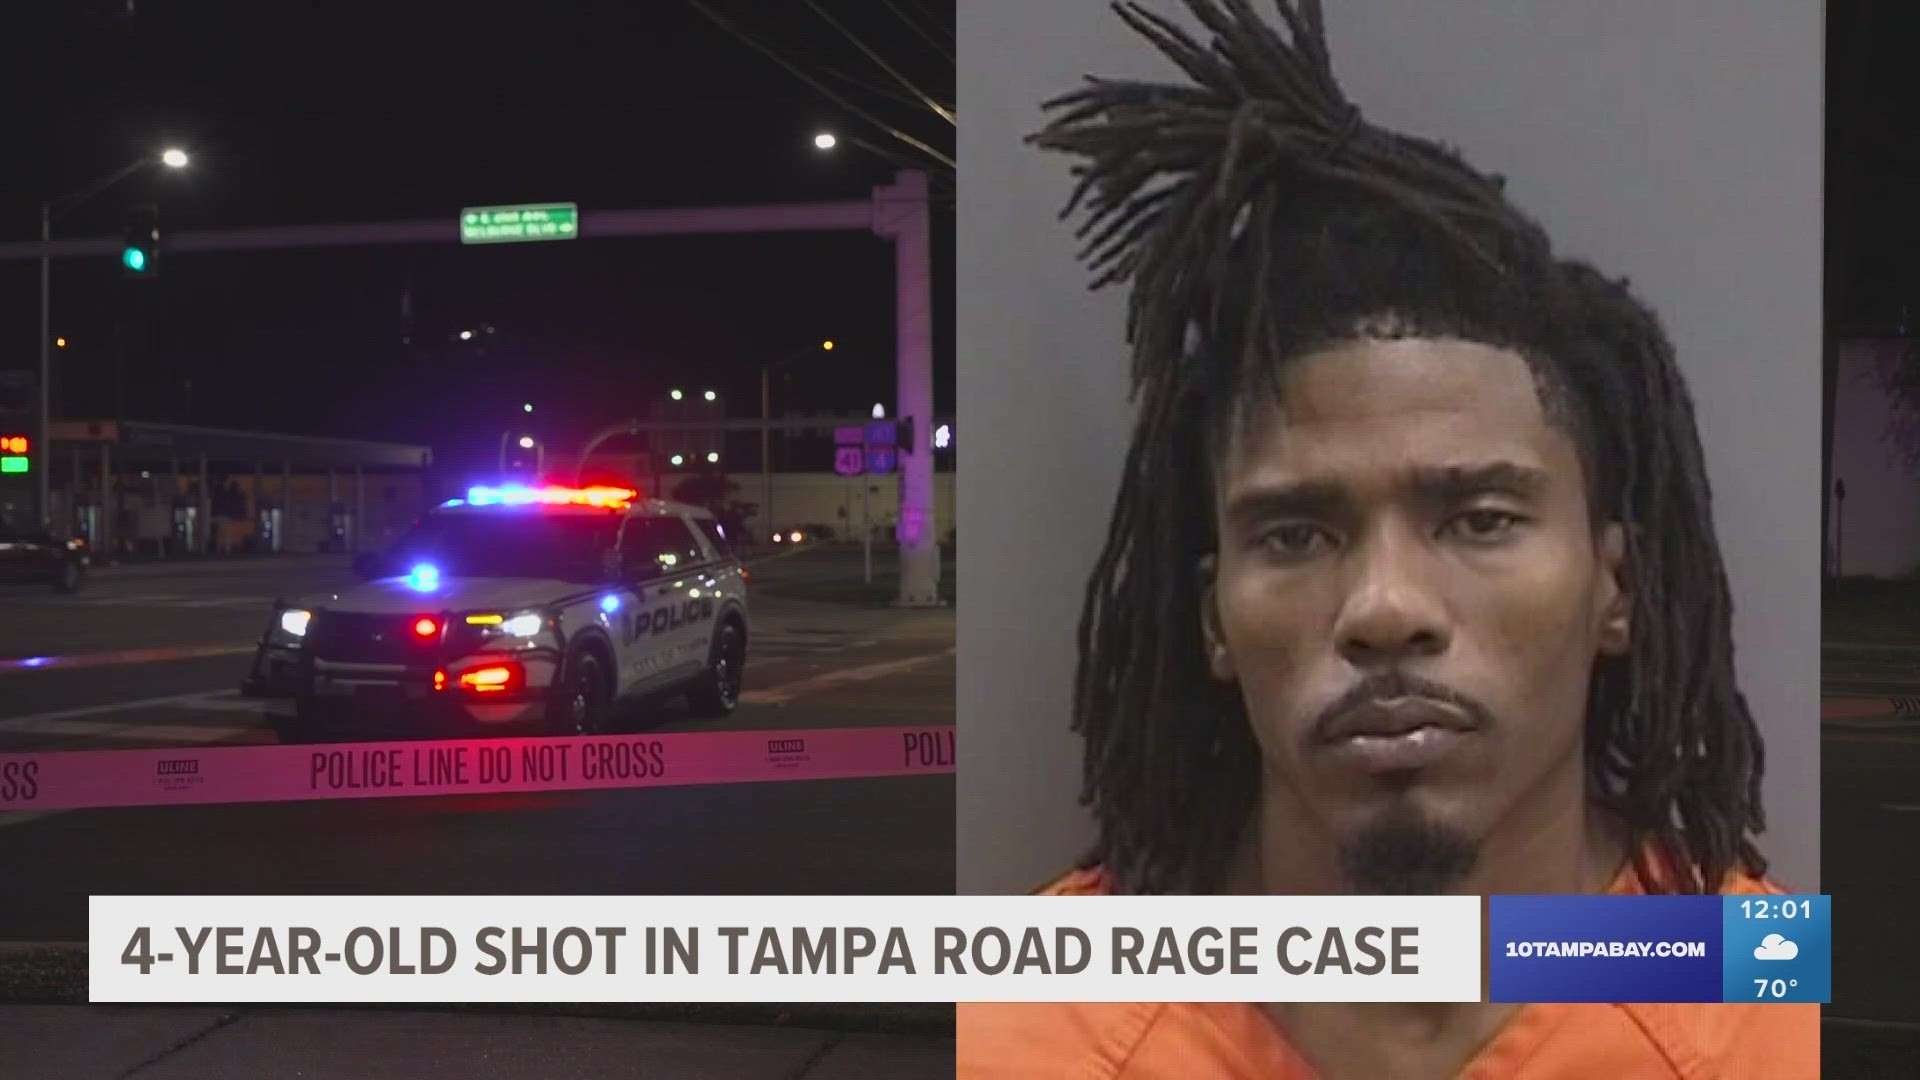 Tampa police are investigating after a 4-year-old girl was injured in a road rage shooting.